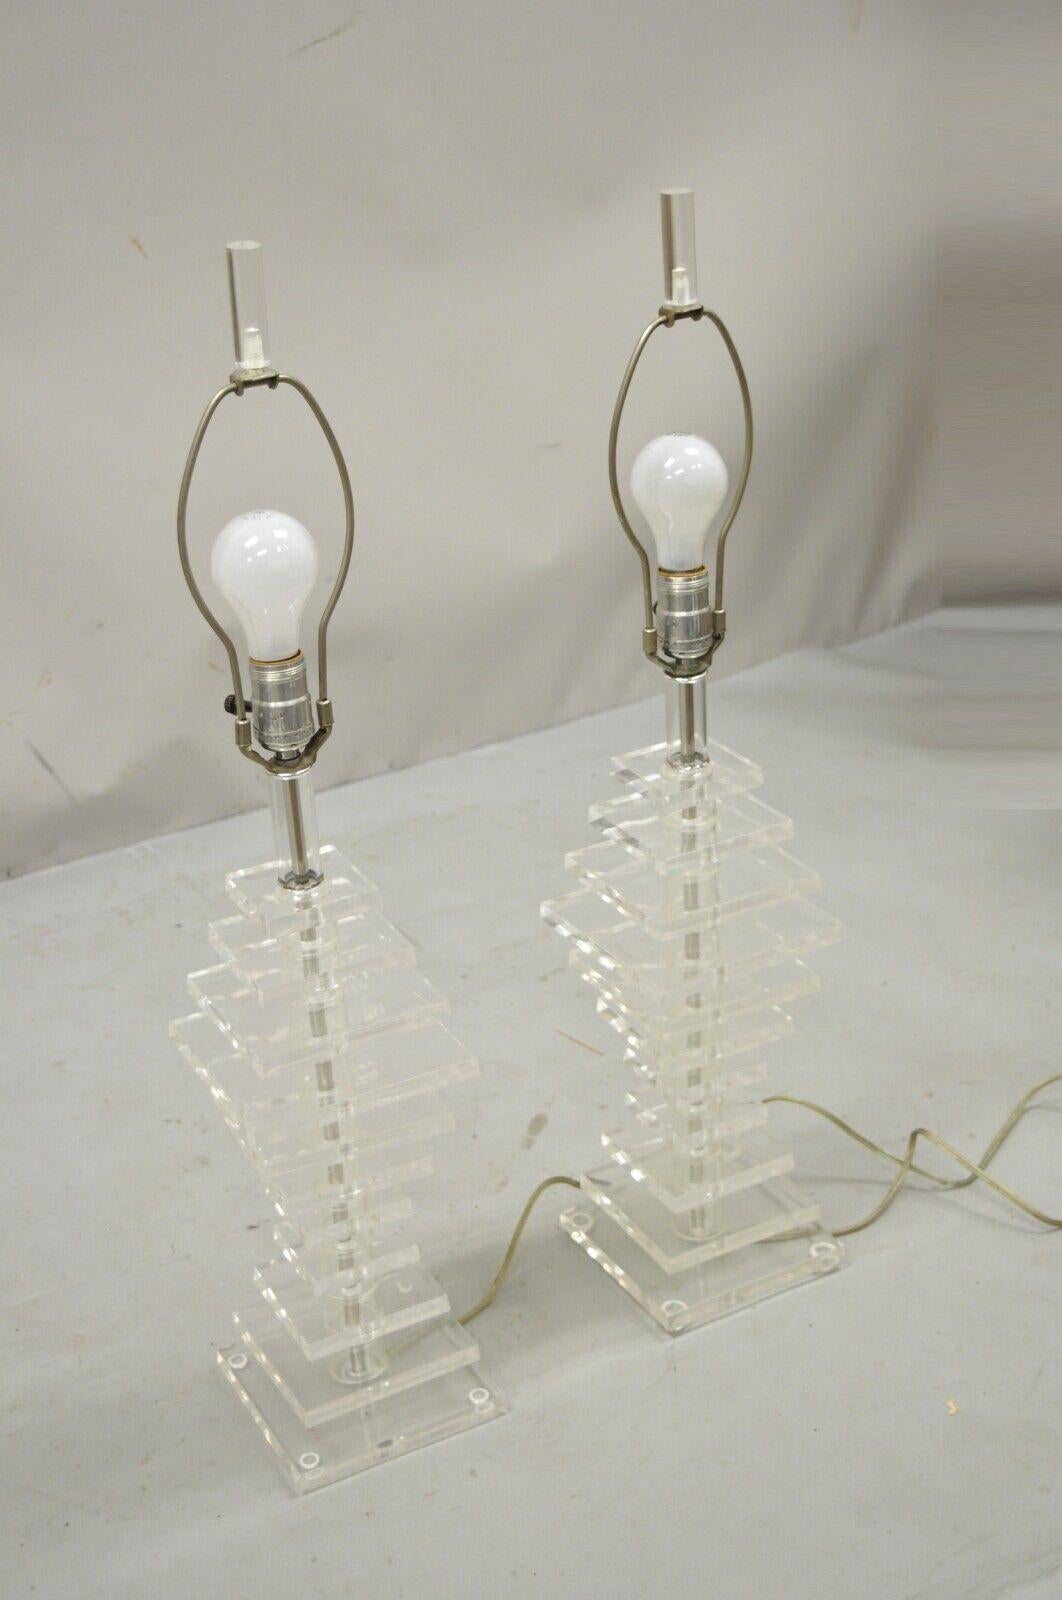 Vintage stacked Lucite Mid-Century Modern table lamps - a pair. Item features stacked lucite forms, lucite finials, very nice vintage pair, clean modernist lines, great style and form. Circa mid 20th century. Measurements: 30